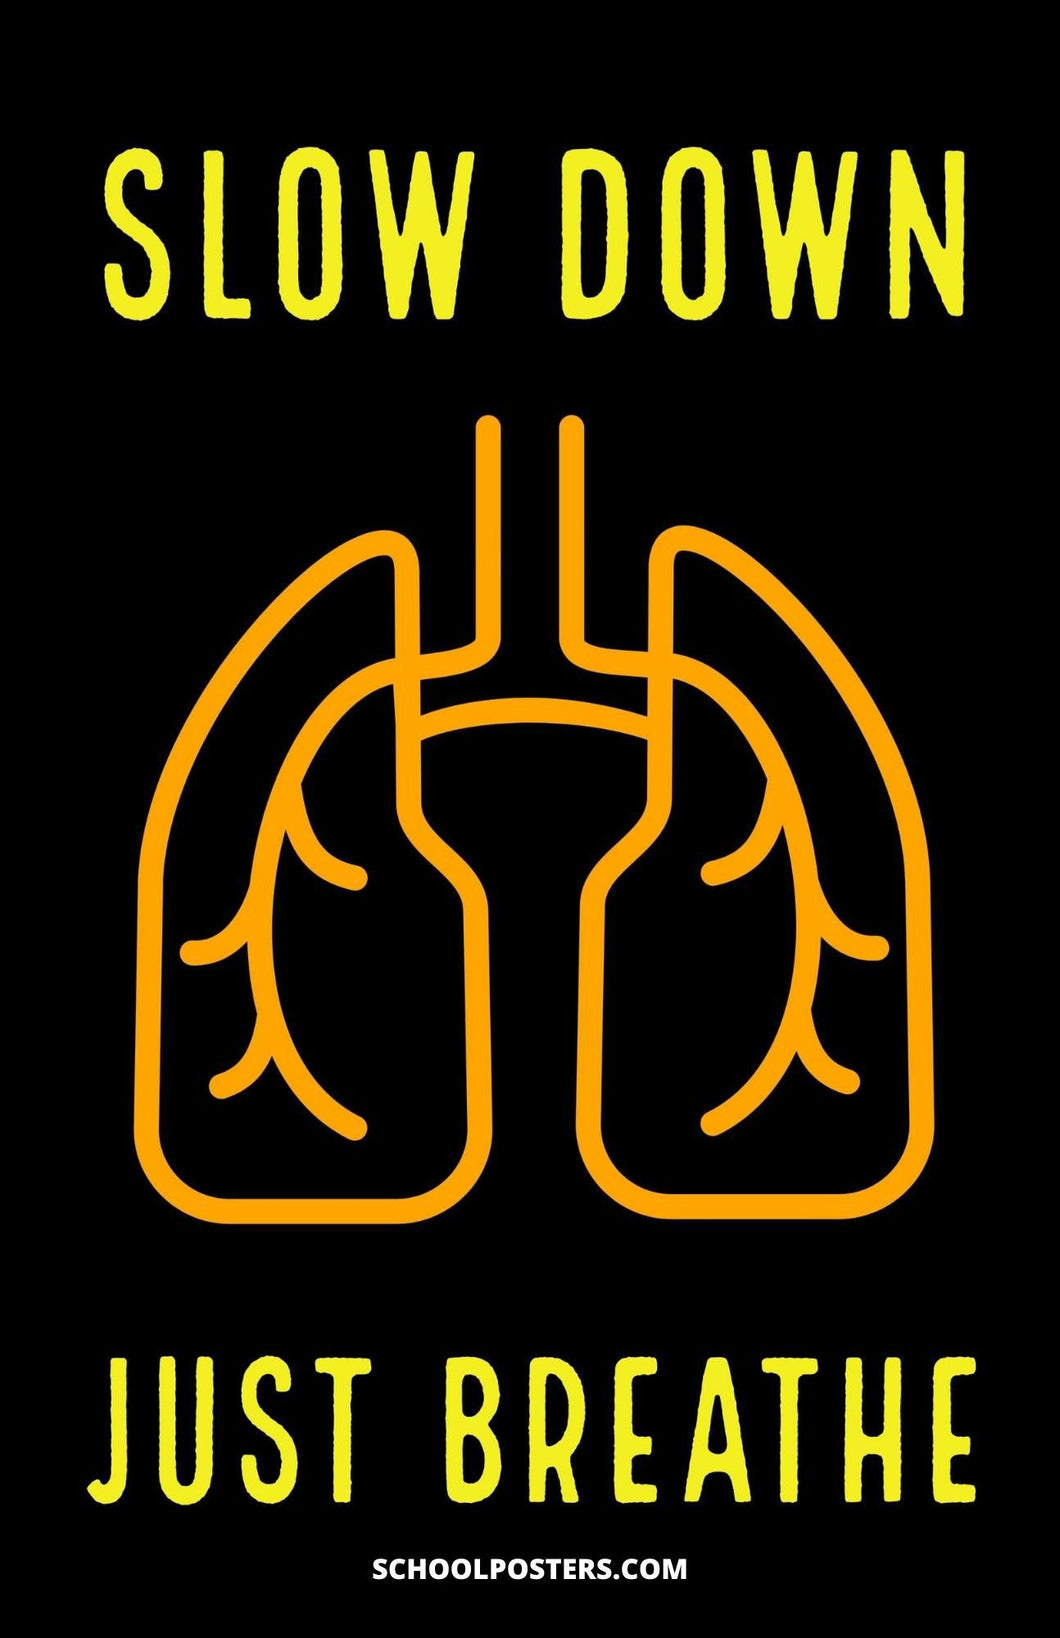 Slow Down Just Breathe Poster